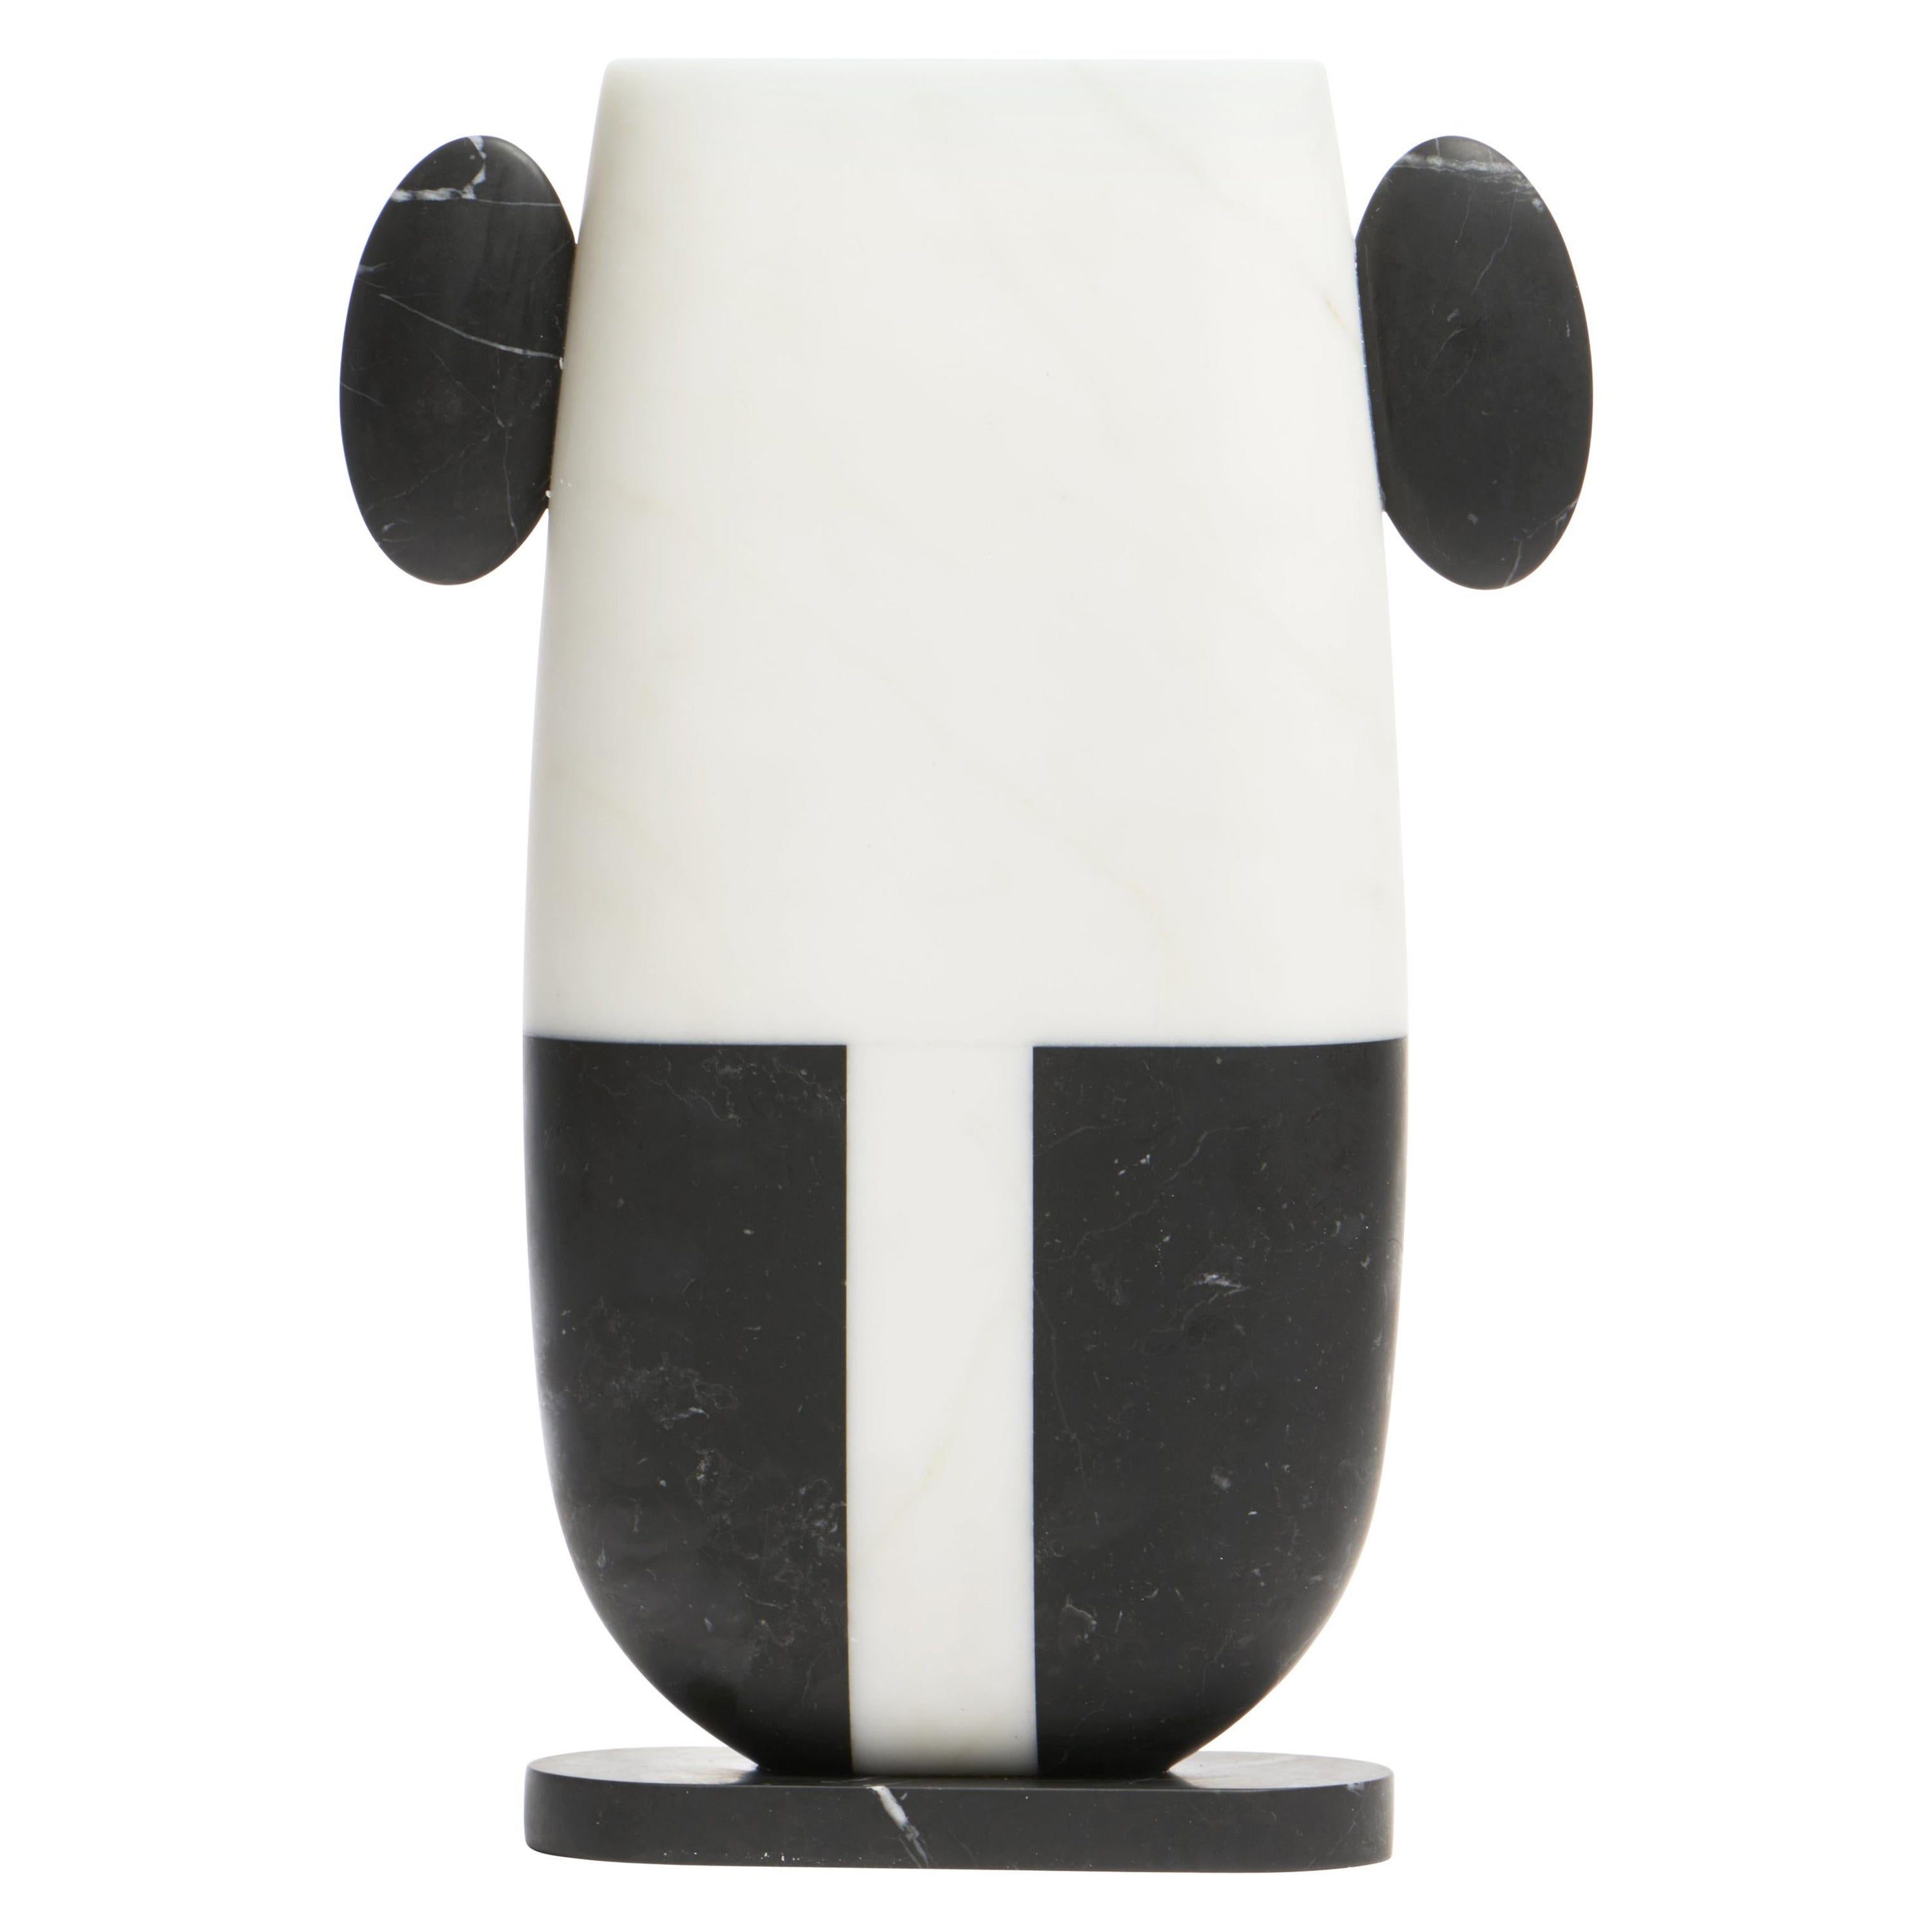 Pietro Marble Vase by Matteo Cibic For Sale